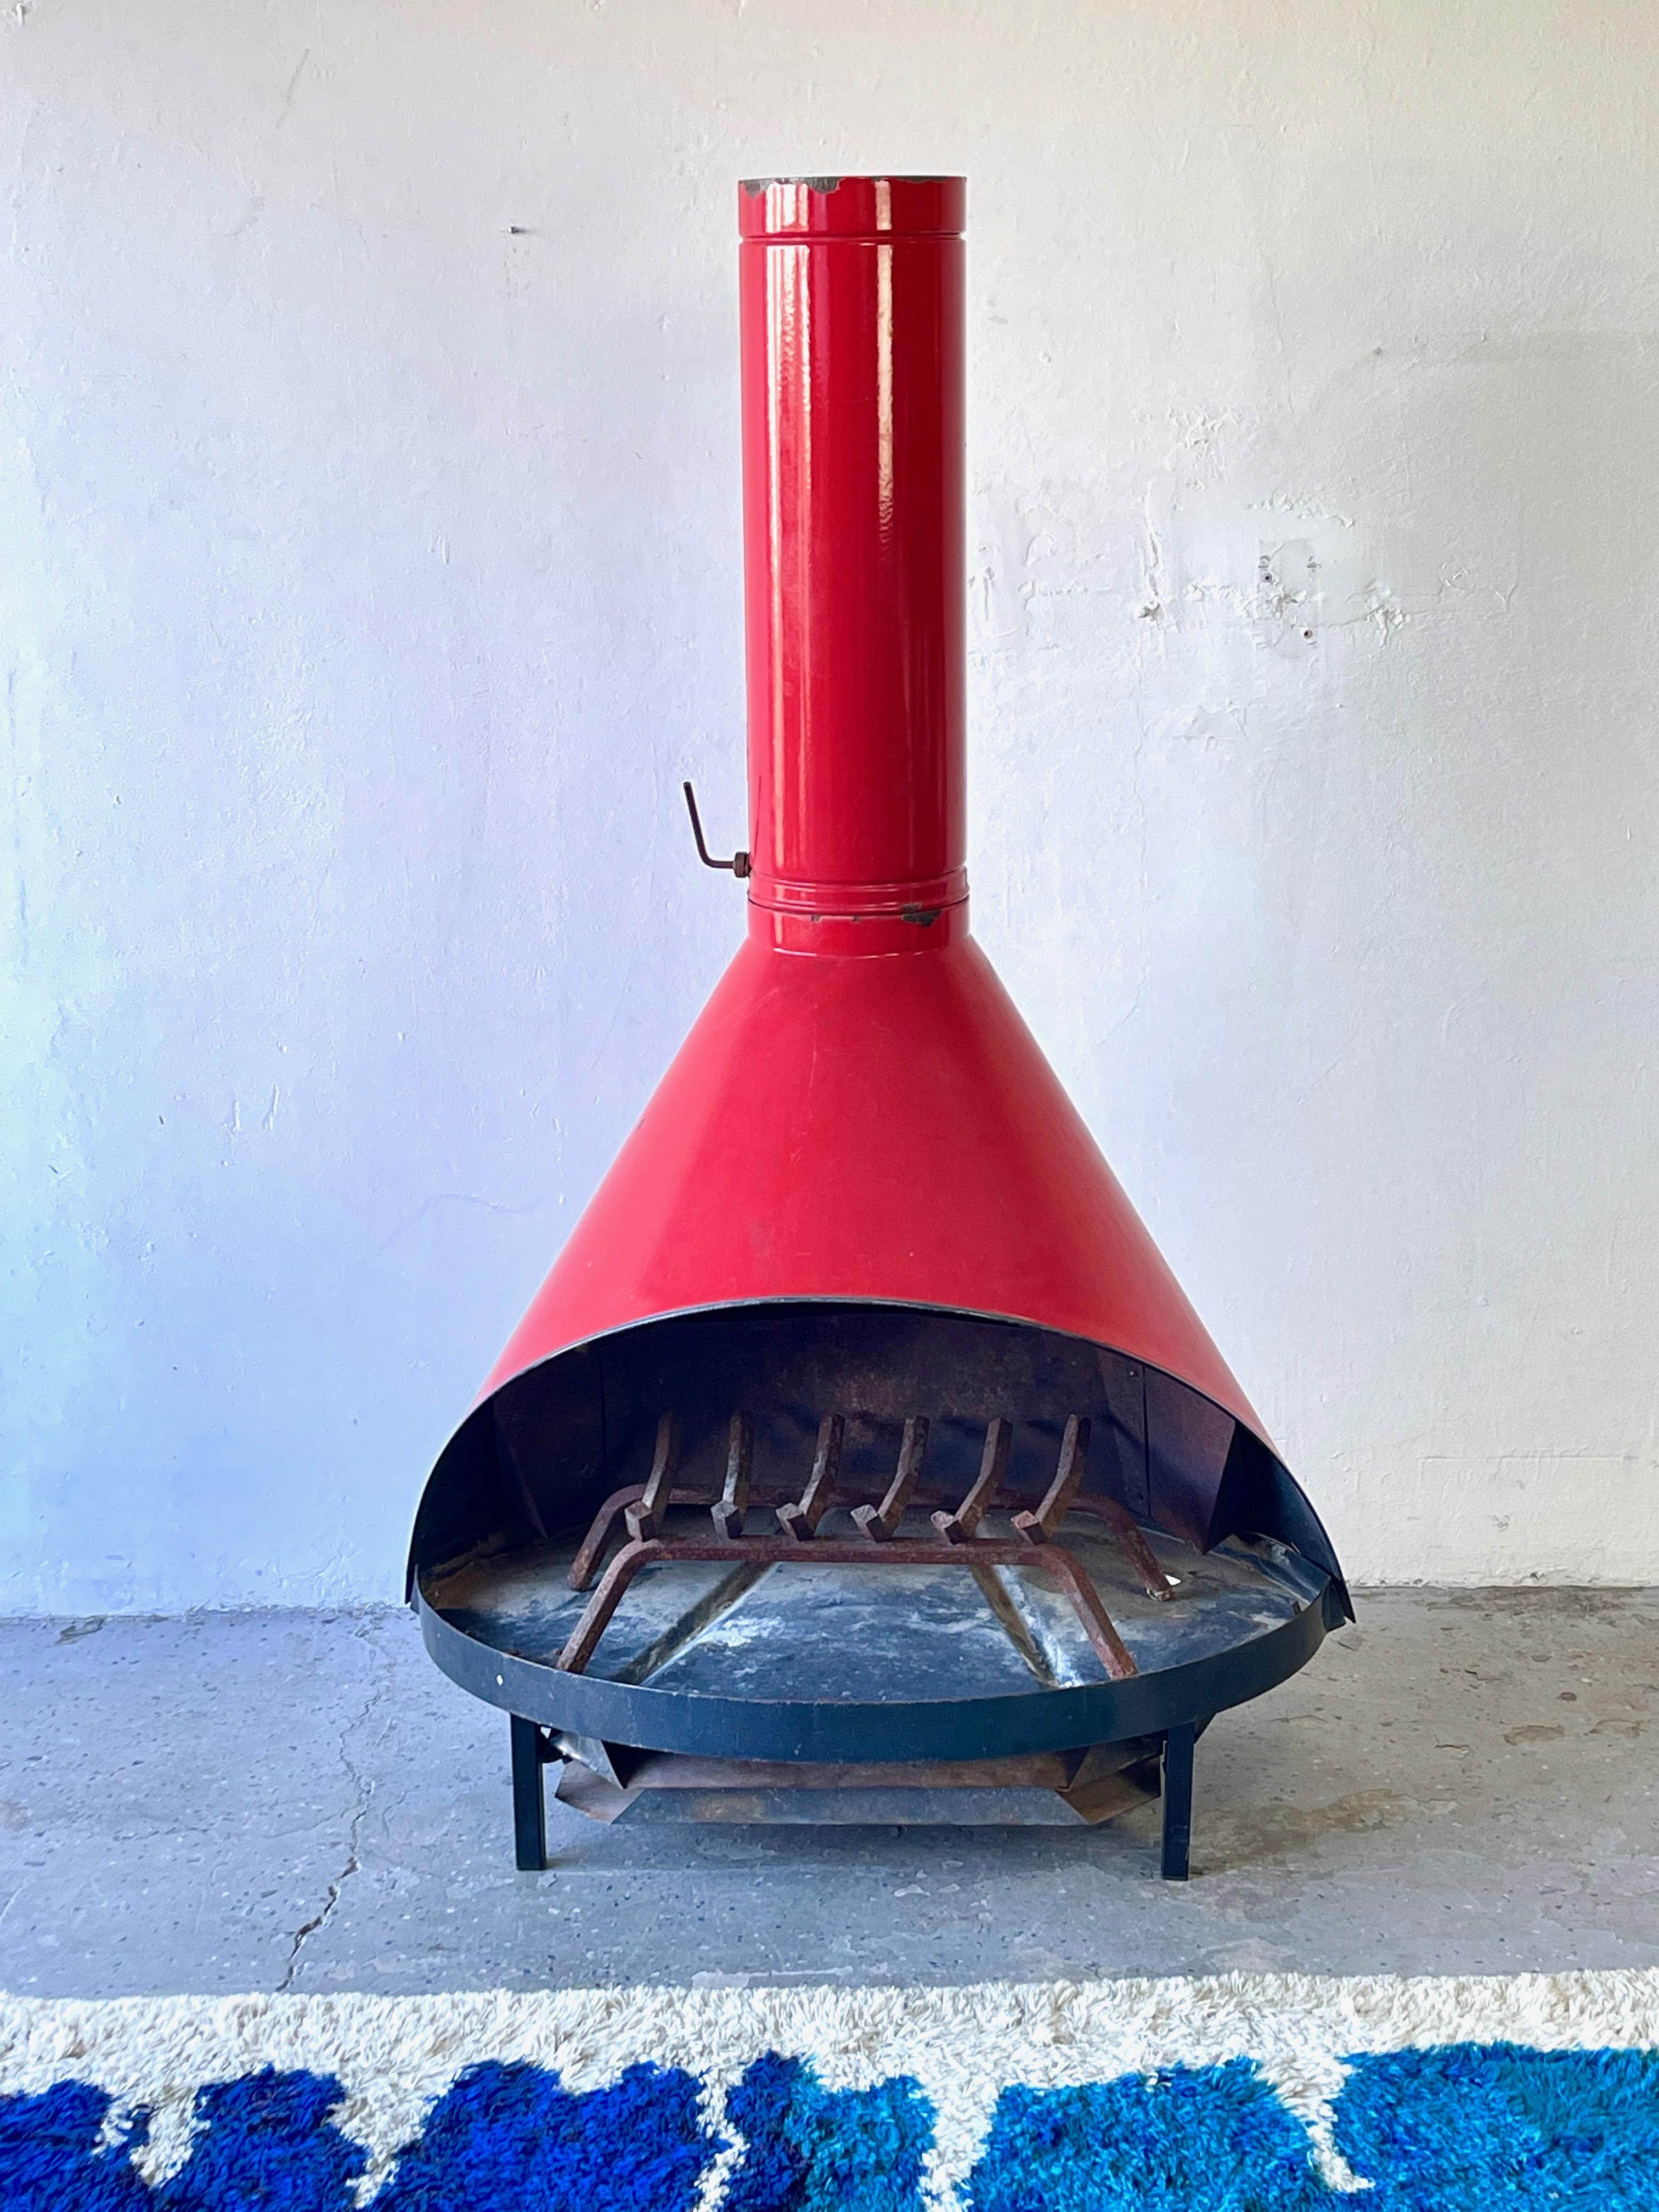 Cool --original red 1970’s enamel vintage, Eames Era Mid-Century Modern large preway Freestanding fireplace. These orignals are extremely sought after!! The pictures say it all. This is pretty much a must have for any true Mid Century or Mid Century